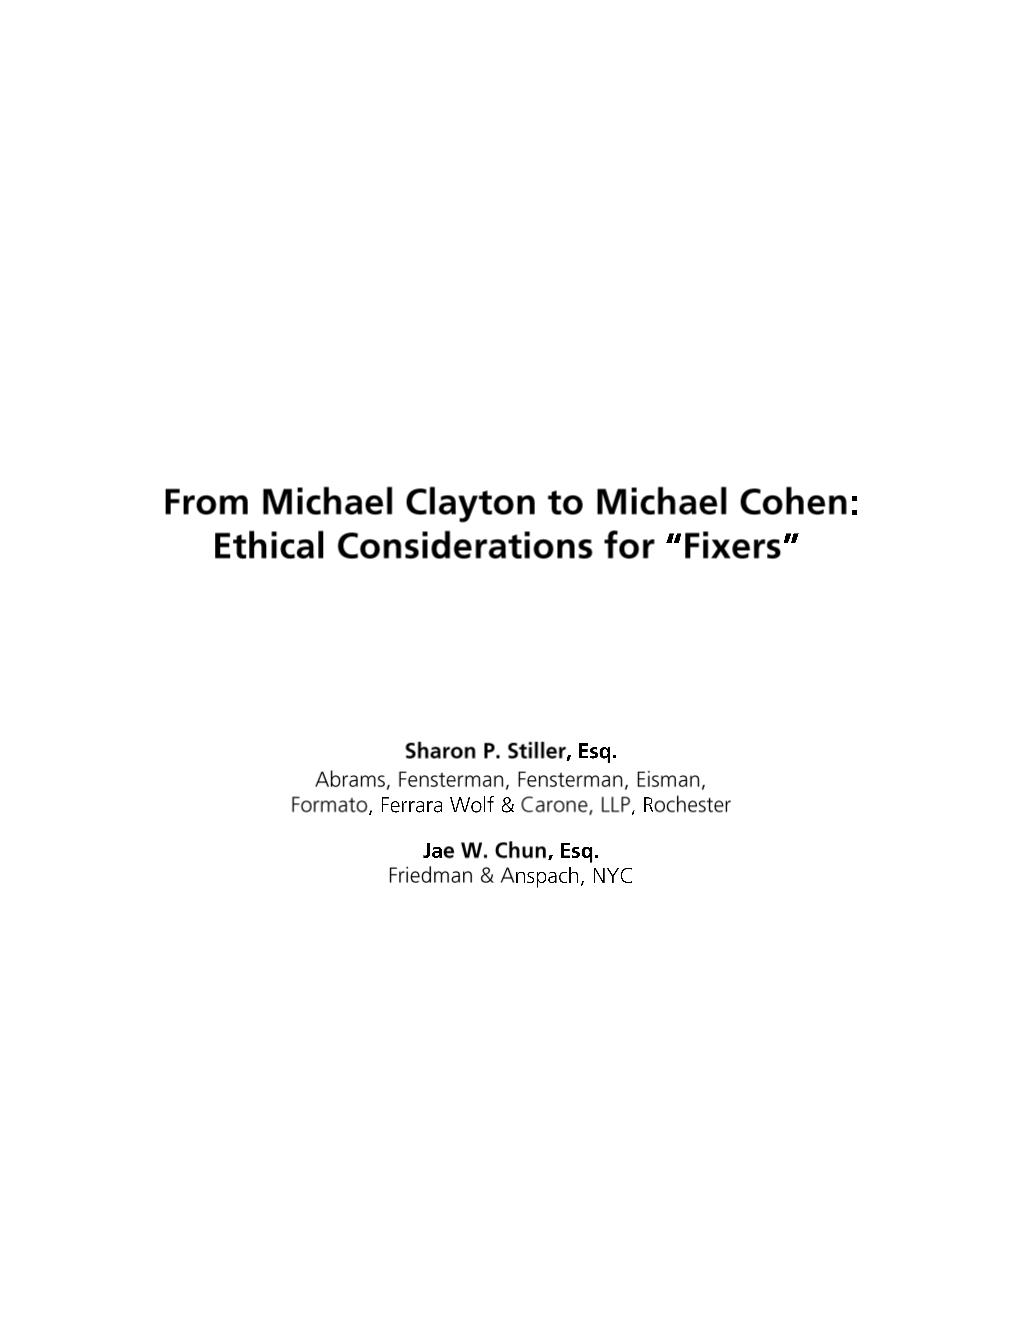 Ethical Dilemmas Exposed by Alleged Conduct of Michael Cohen and Michael Avenatti*